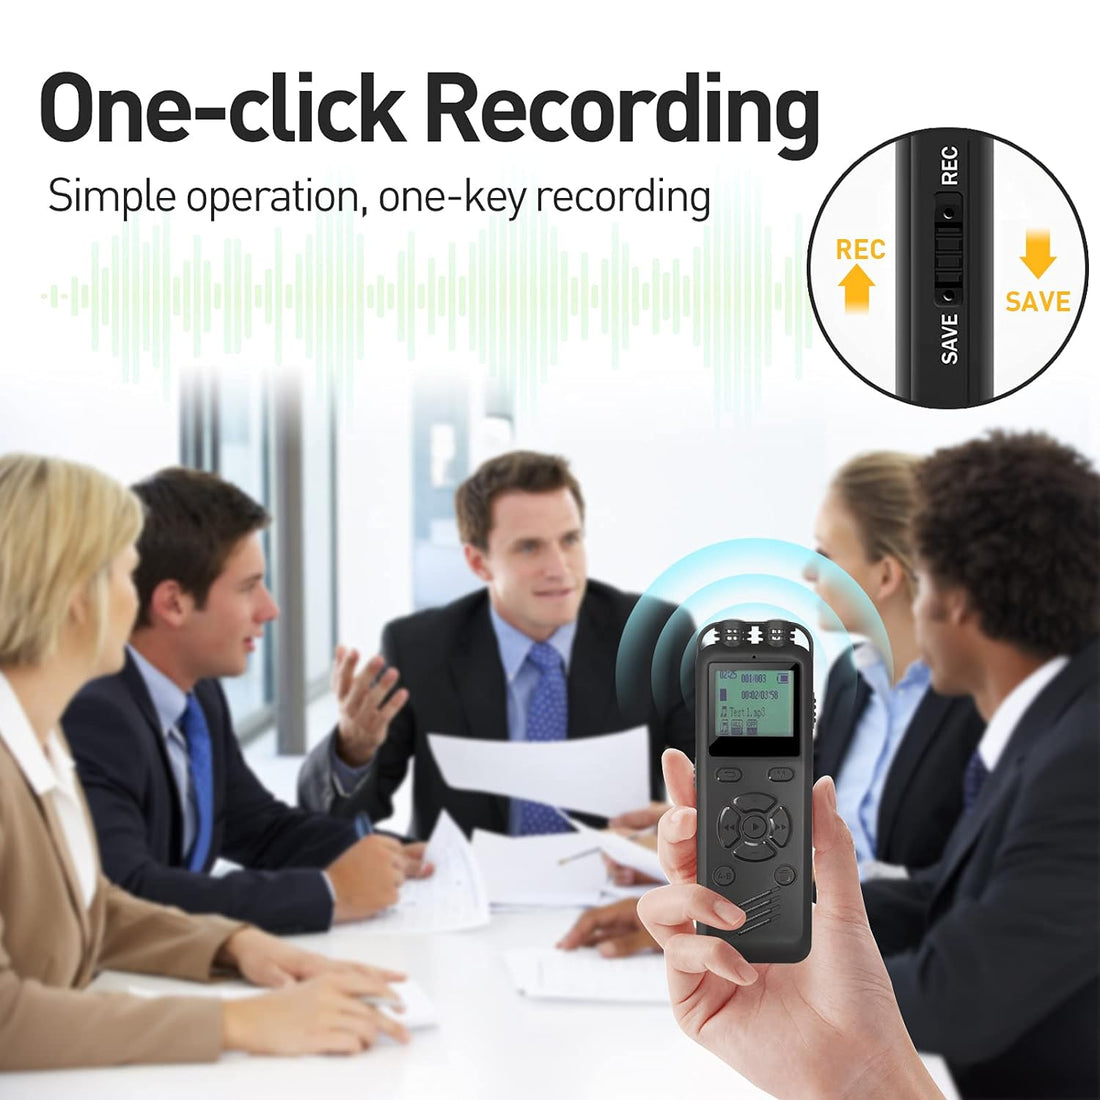 16GB Digital Voice Recorder Voice Activated Recorder for Lectures Meetings Audio Recorder with Noise Reduction Recording Device External Microphone and Line in Recording A-B Repeat MP3 Speaker